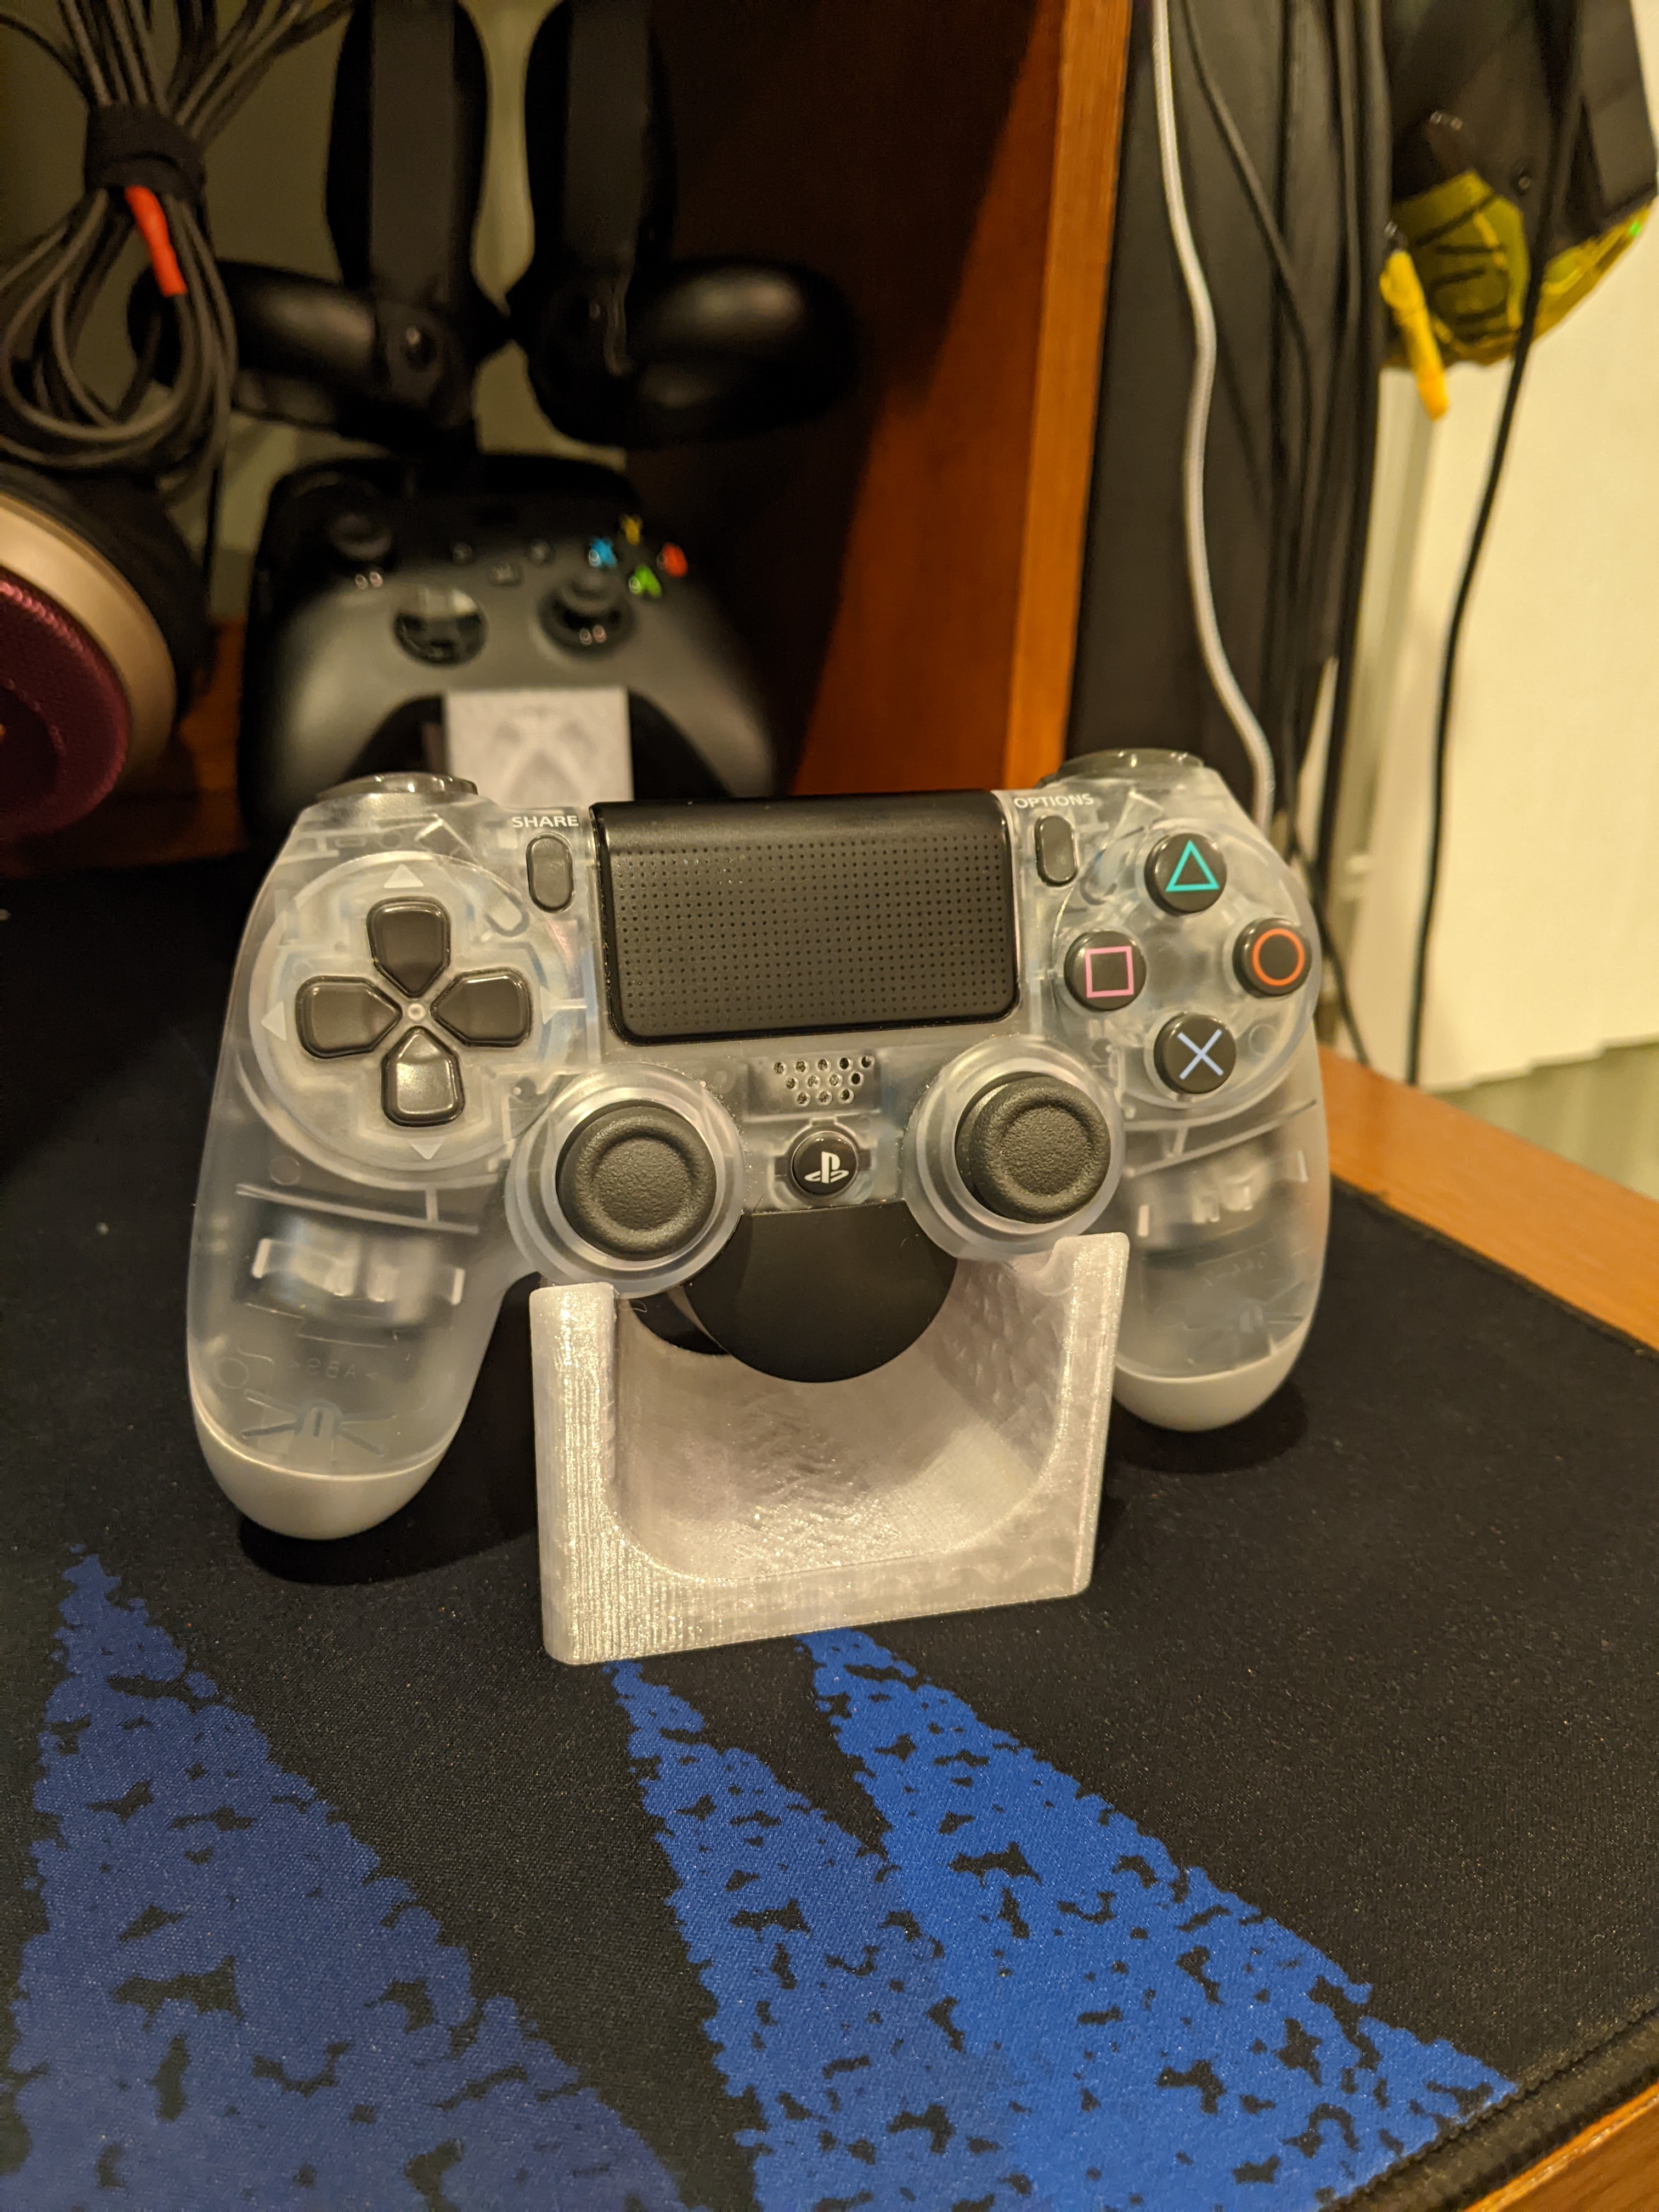 Universal Game Controller Holder (originally intended for DS4 with Back Button Attachment)